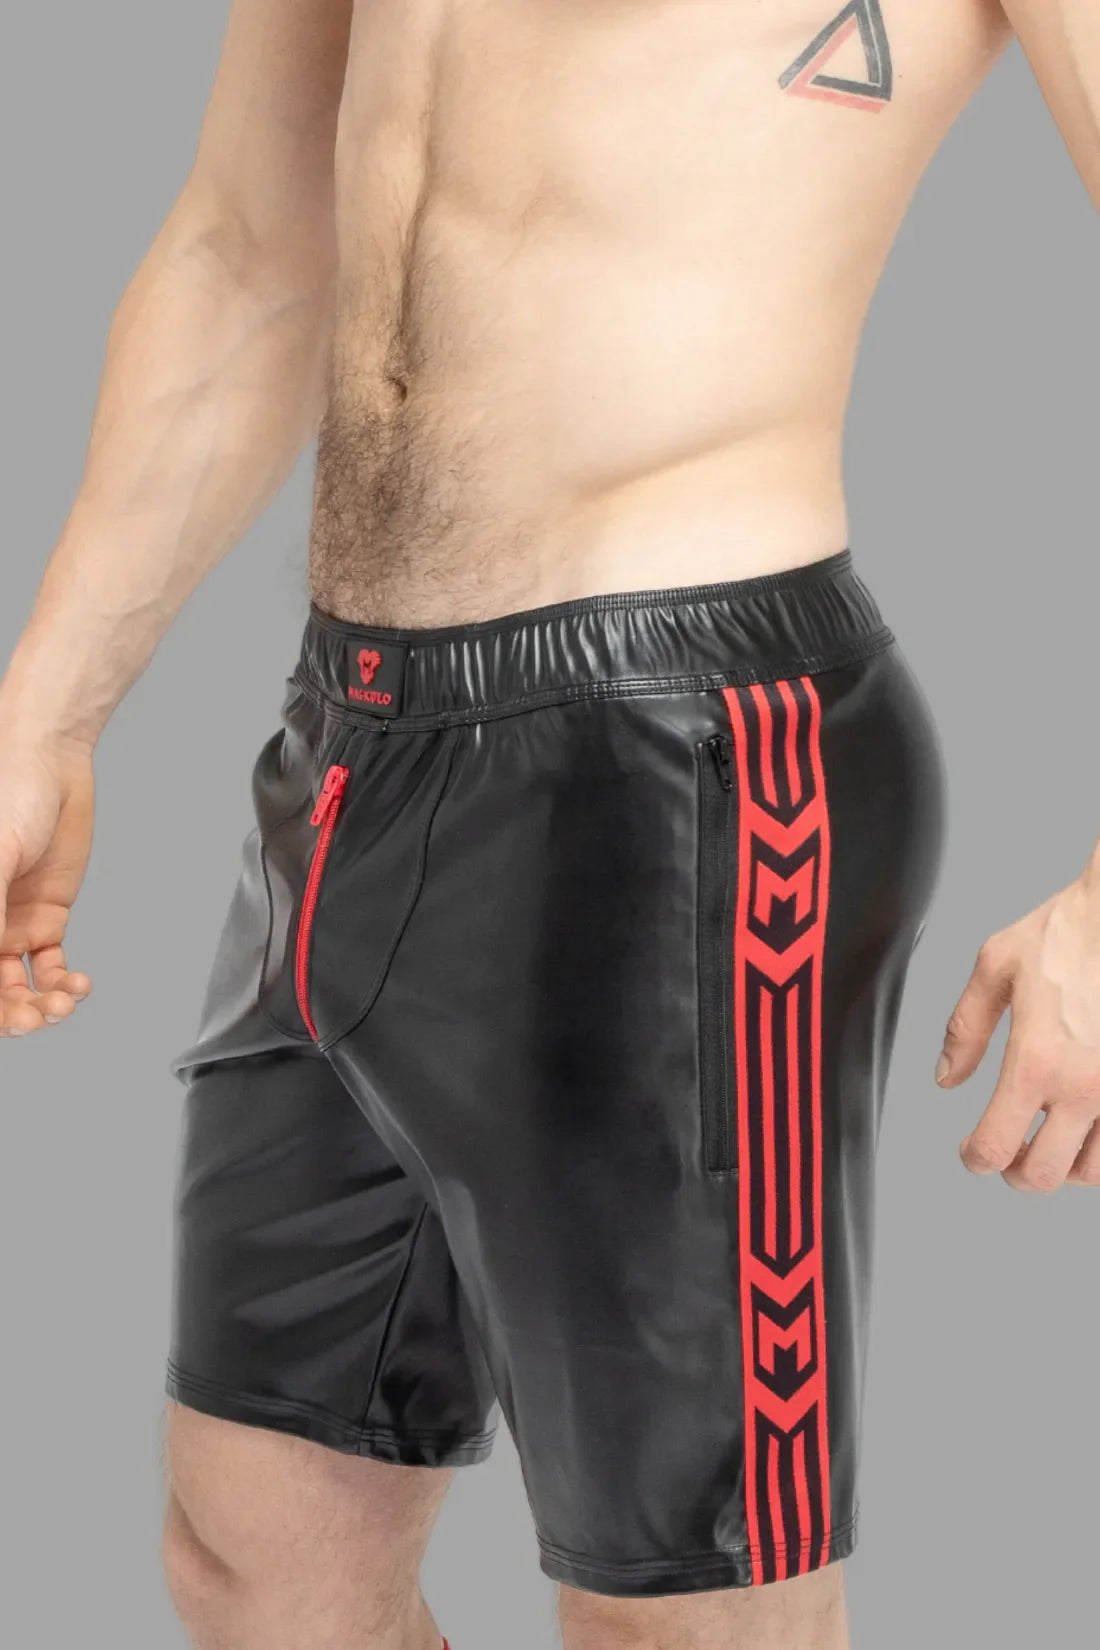 Skulla. Leatherette Soccer Shorts. Black and Red